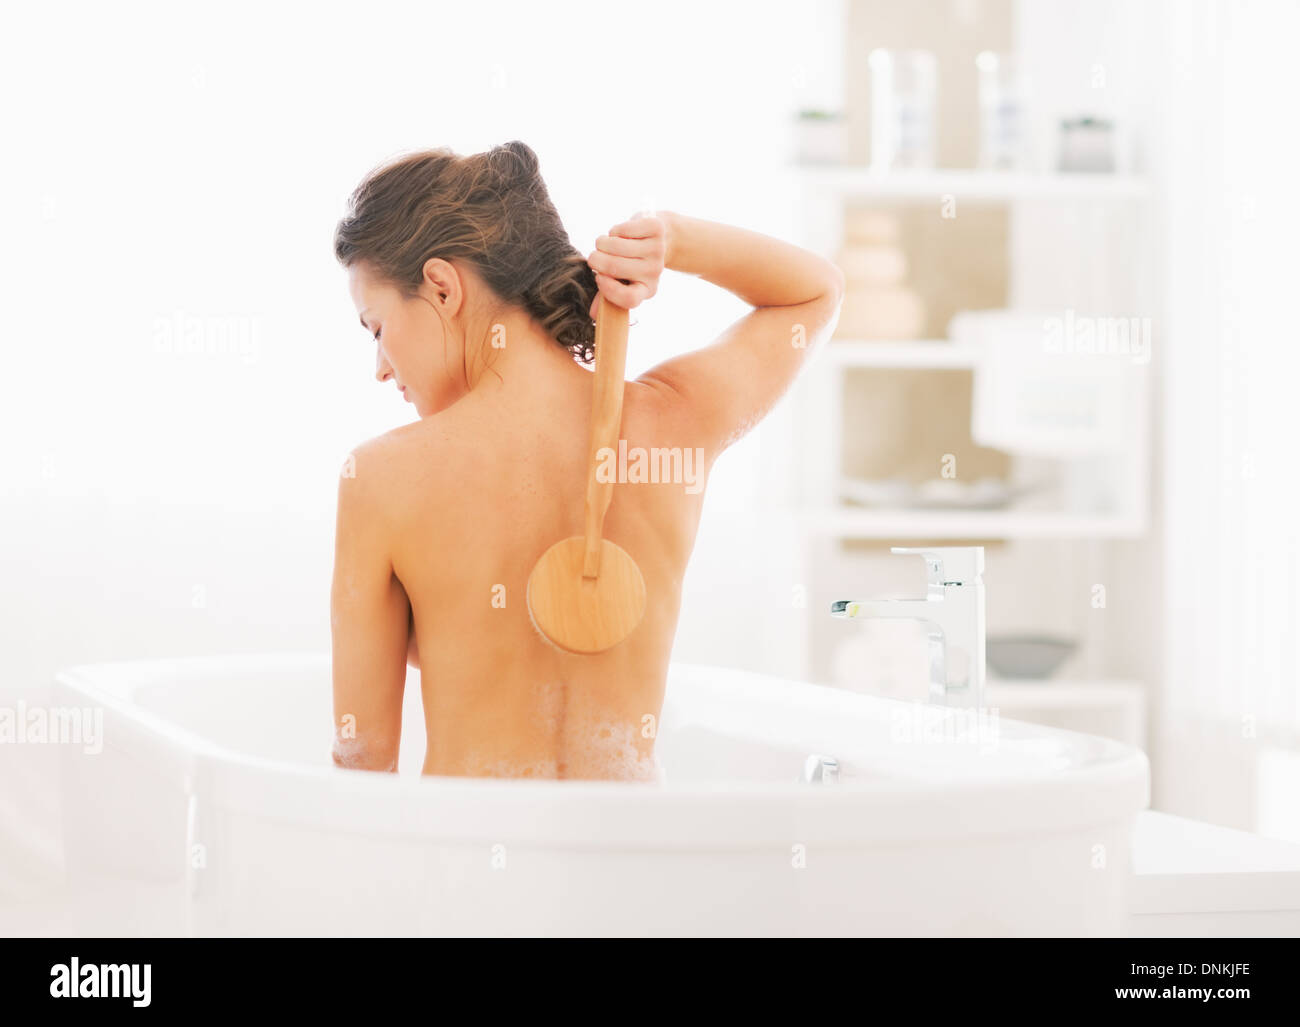 Young woman washing with body brush in bathtub Stock Photo